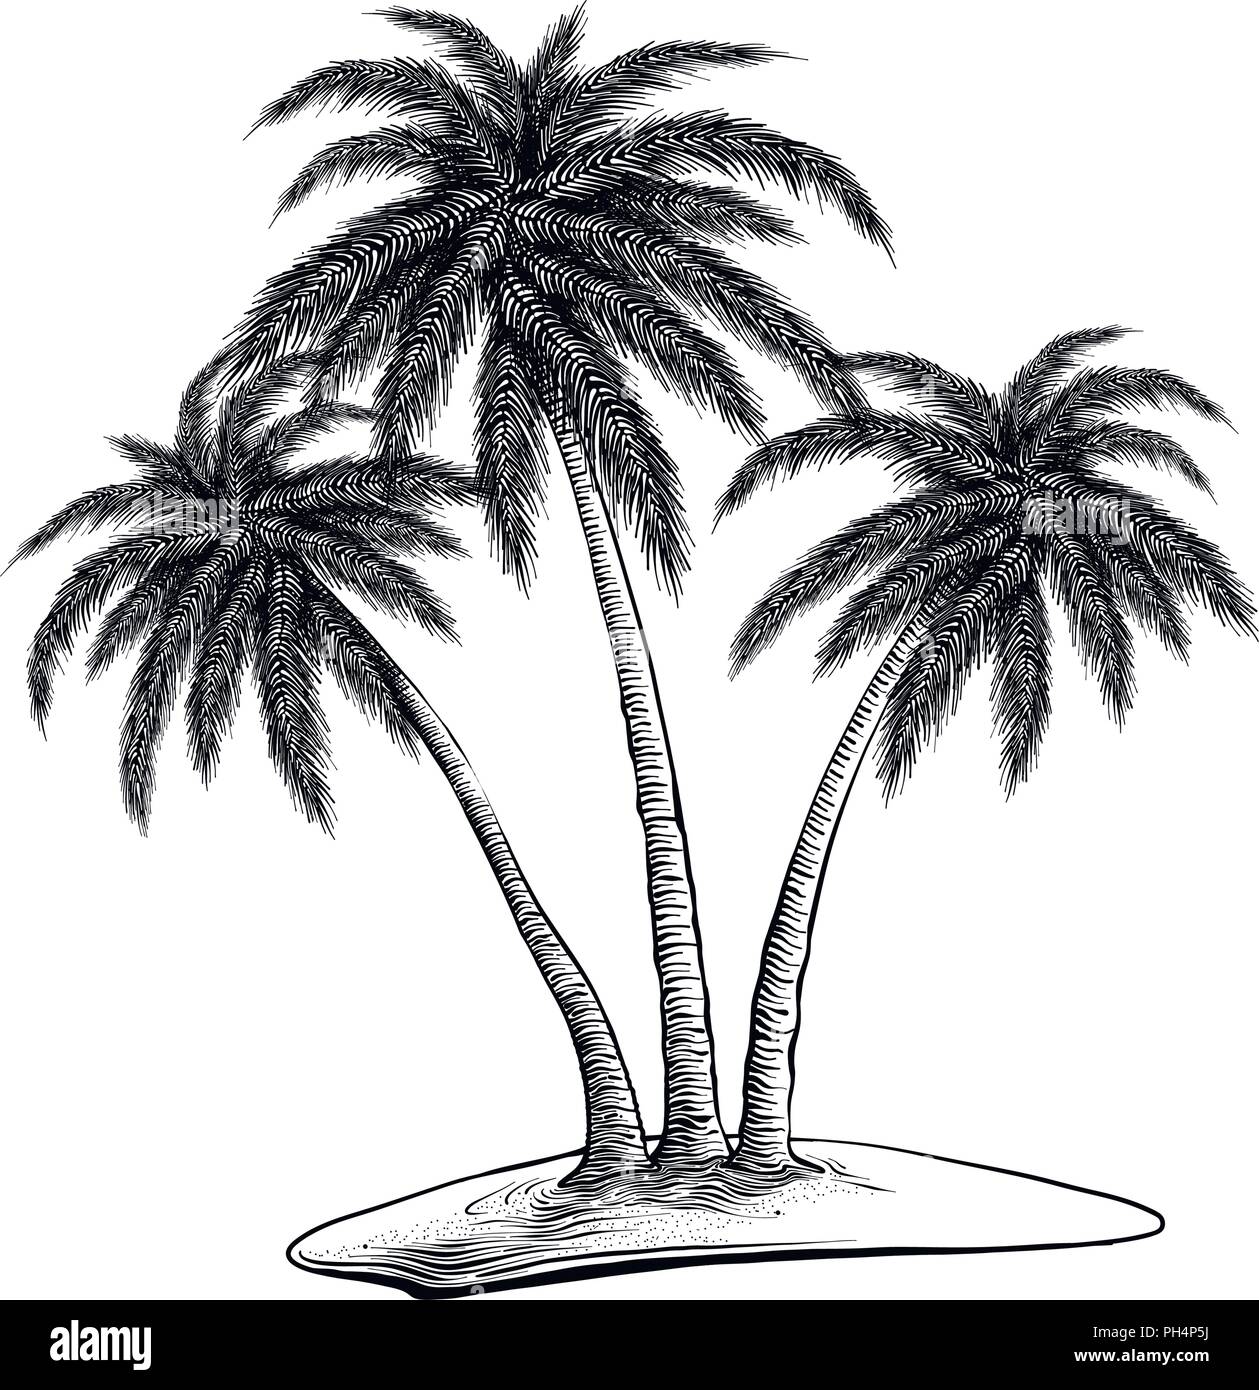 How To Draw A Palm Tree Step By Step  Palm Tree Drawing Easy  YouTube